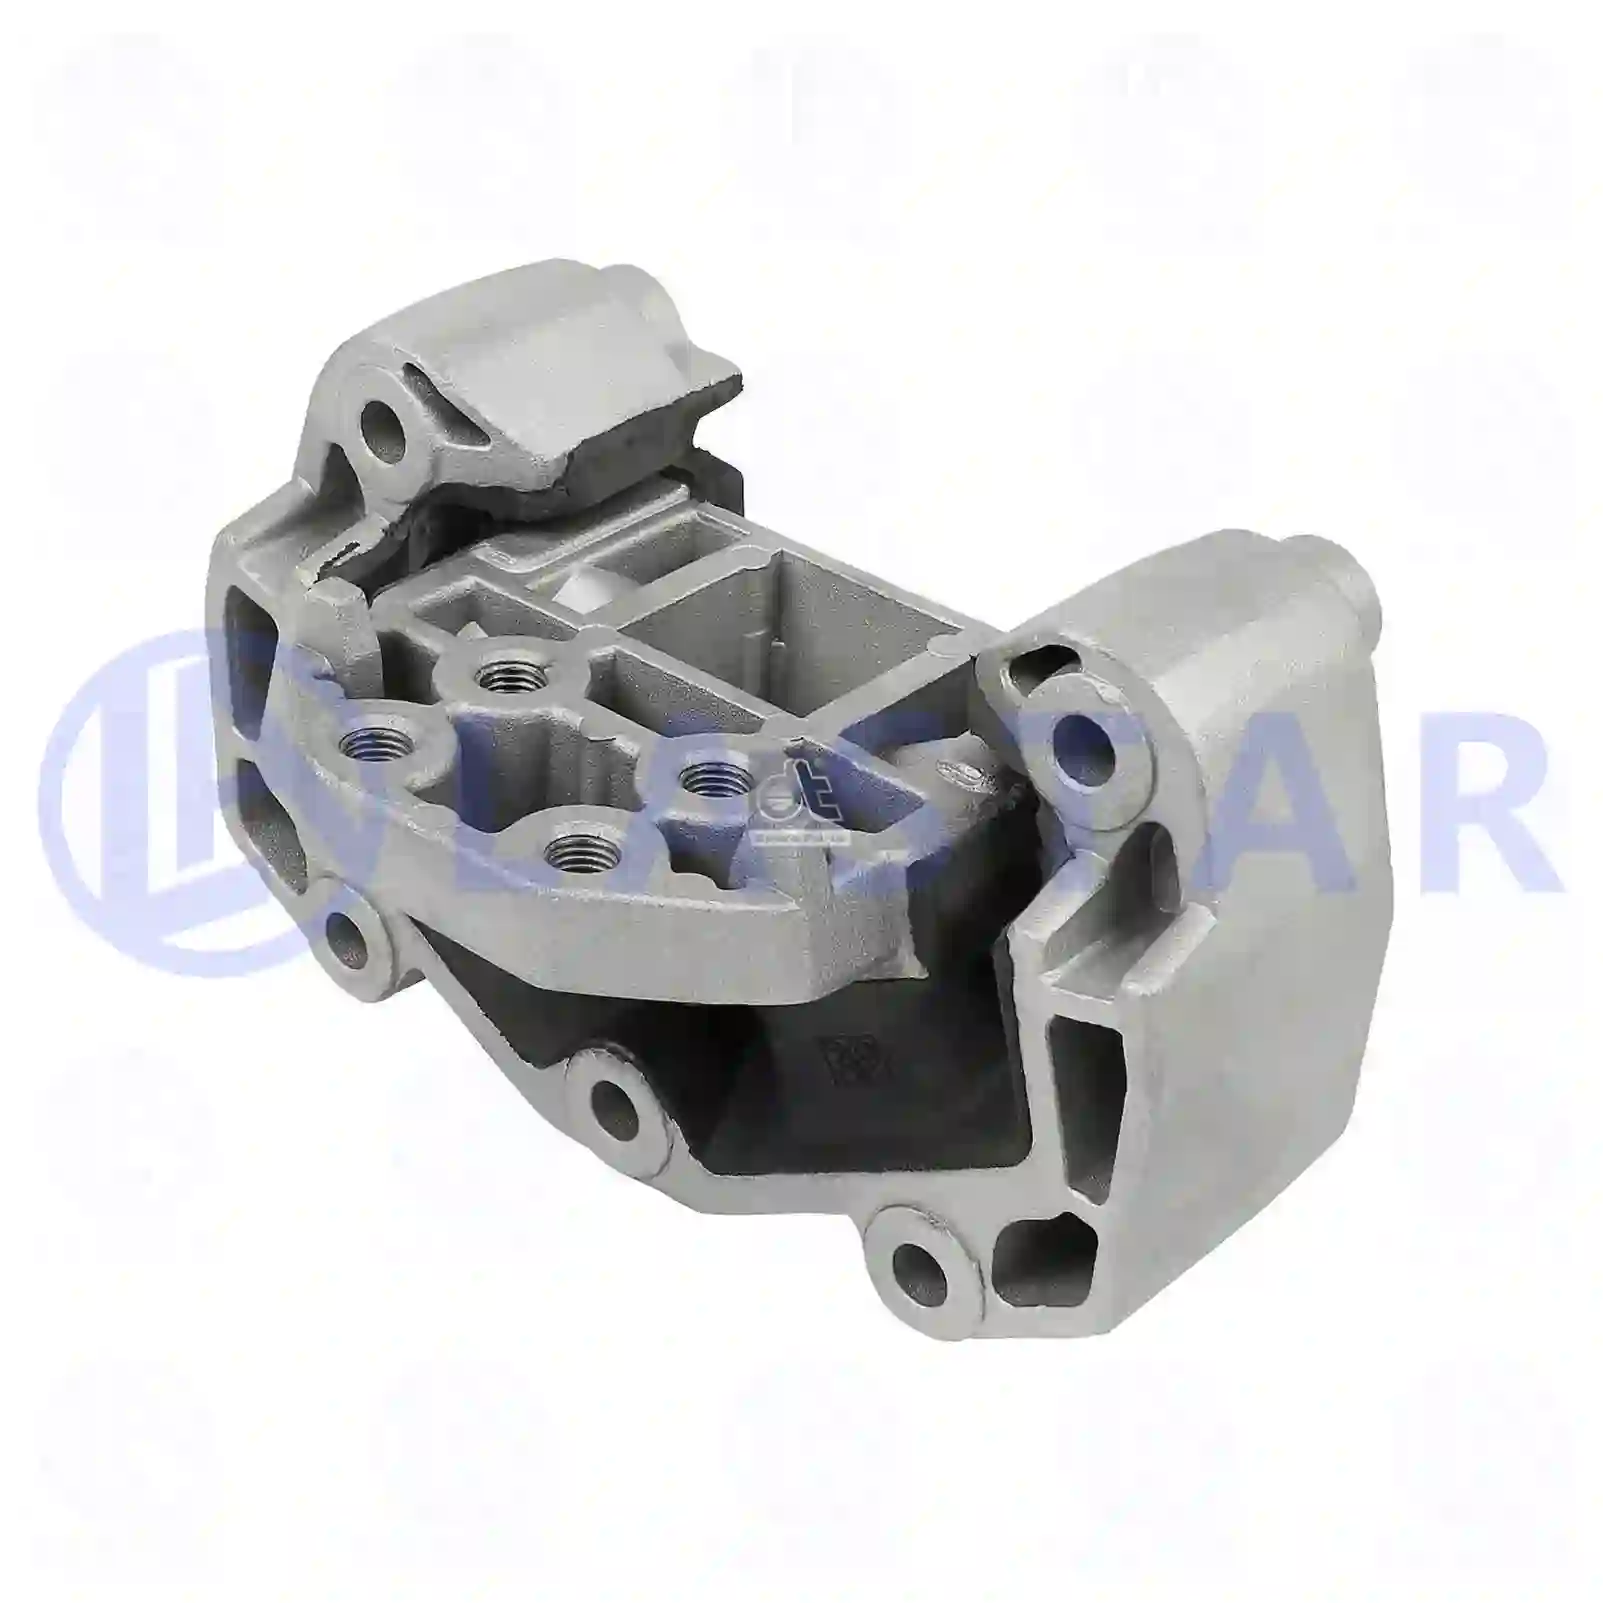 Gearbox mounting, 77733686, 1336882, ZG30438-0008, , ||  77733686 Lastar Spare Part | Truck Spare Parts, Auotomotive Spare Parts Gearbox mounting, 77733686, 1336882, ZG30438-0008, , ||  77733686 Lastar Spare Part | Truck Spare Parts, Auotomotive Spare Parts